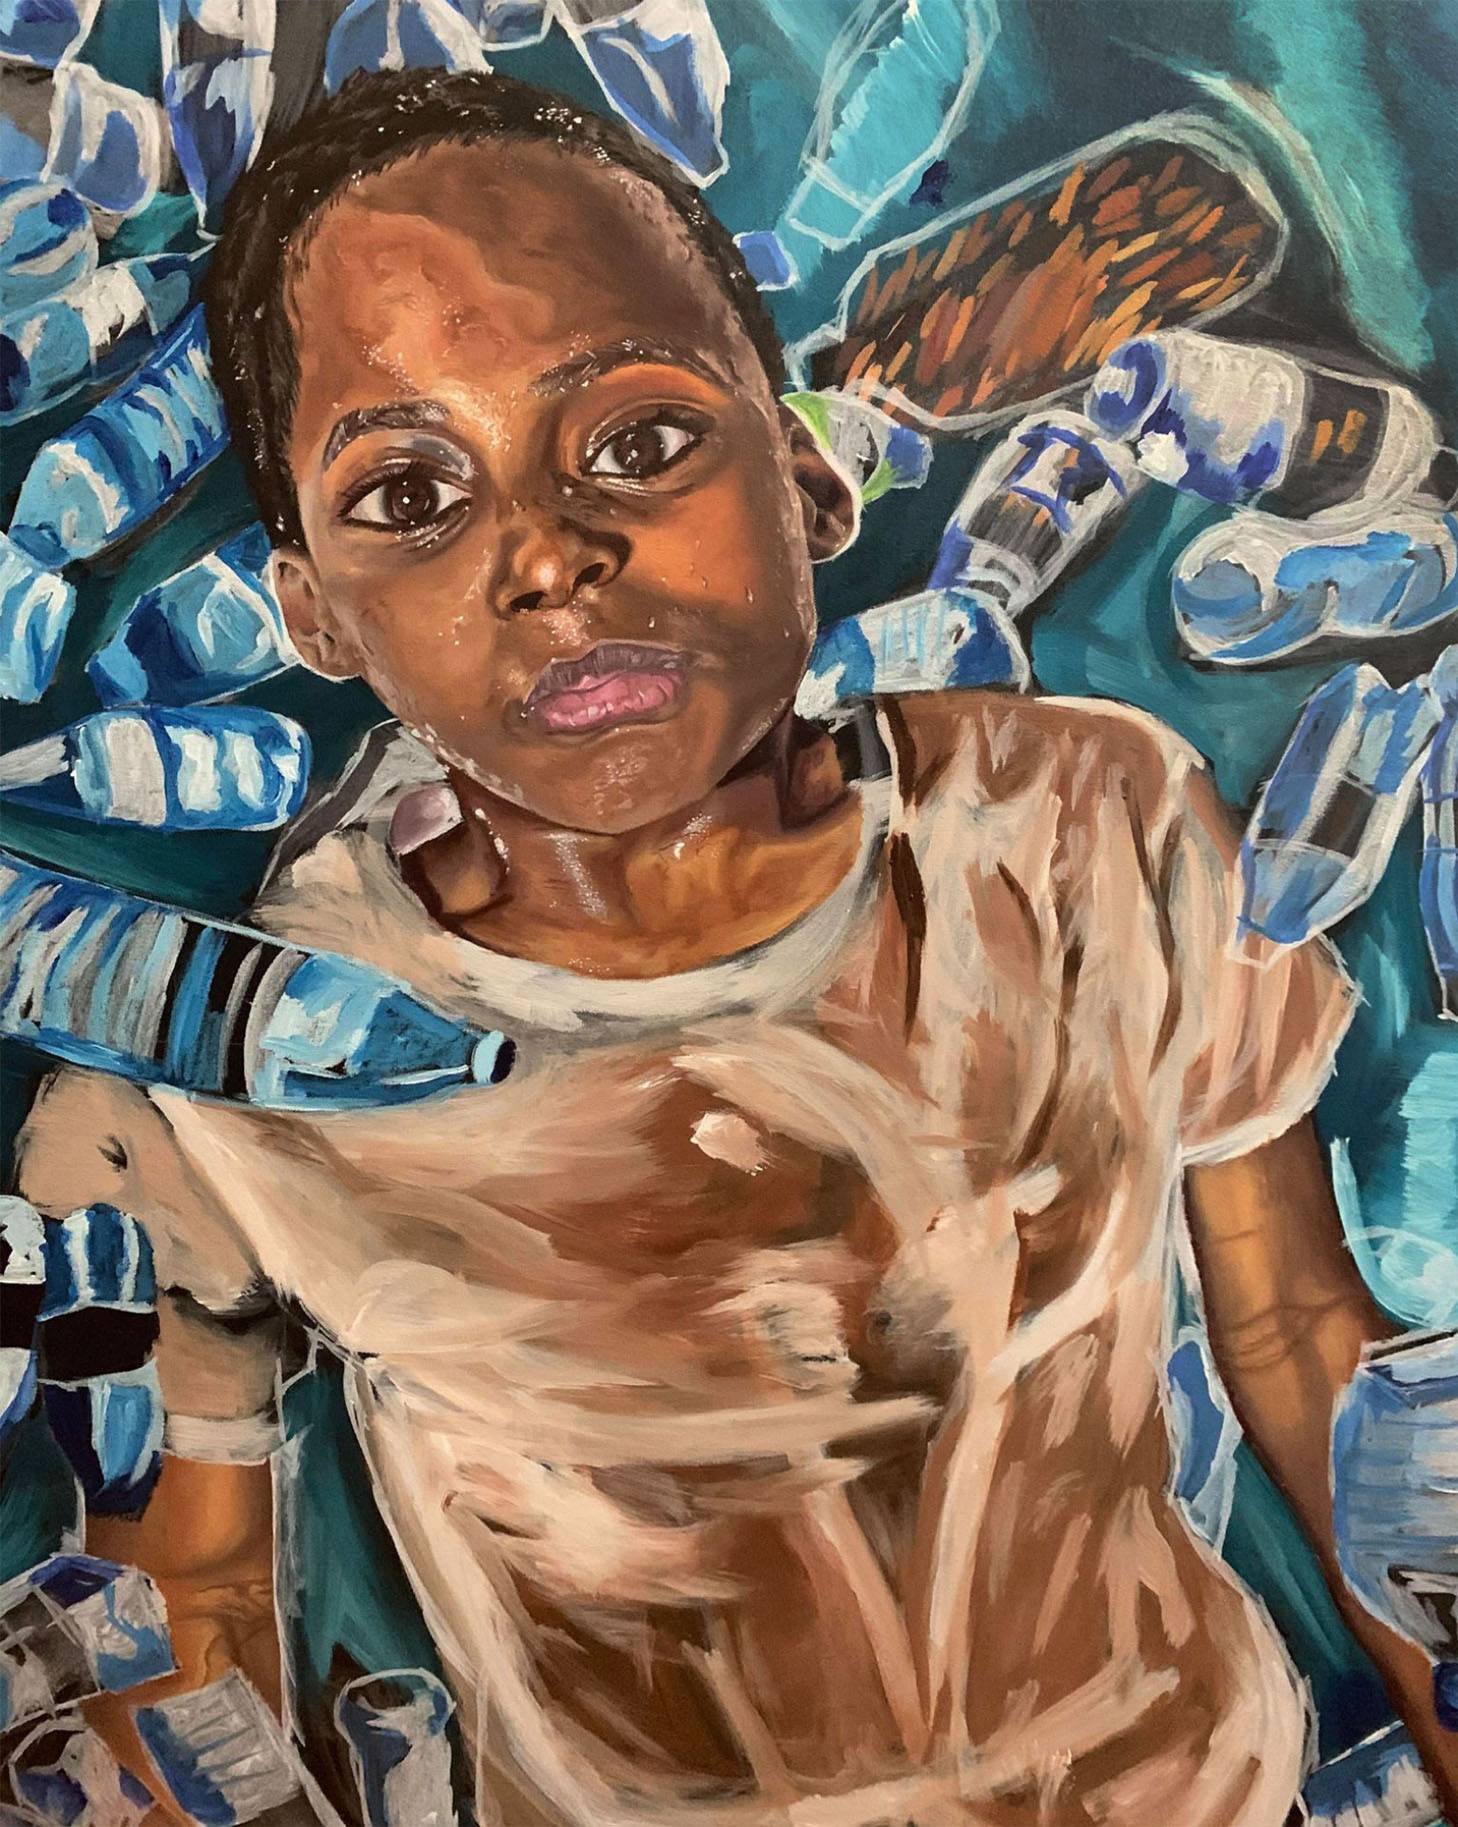 A painting of a young boy surrounded by plastic bottles